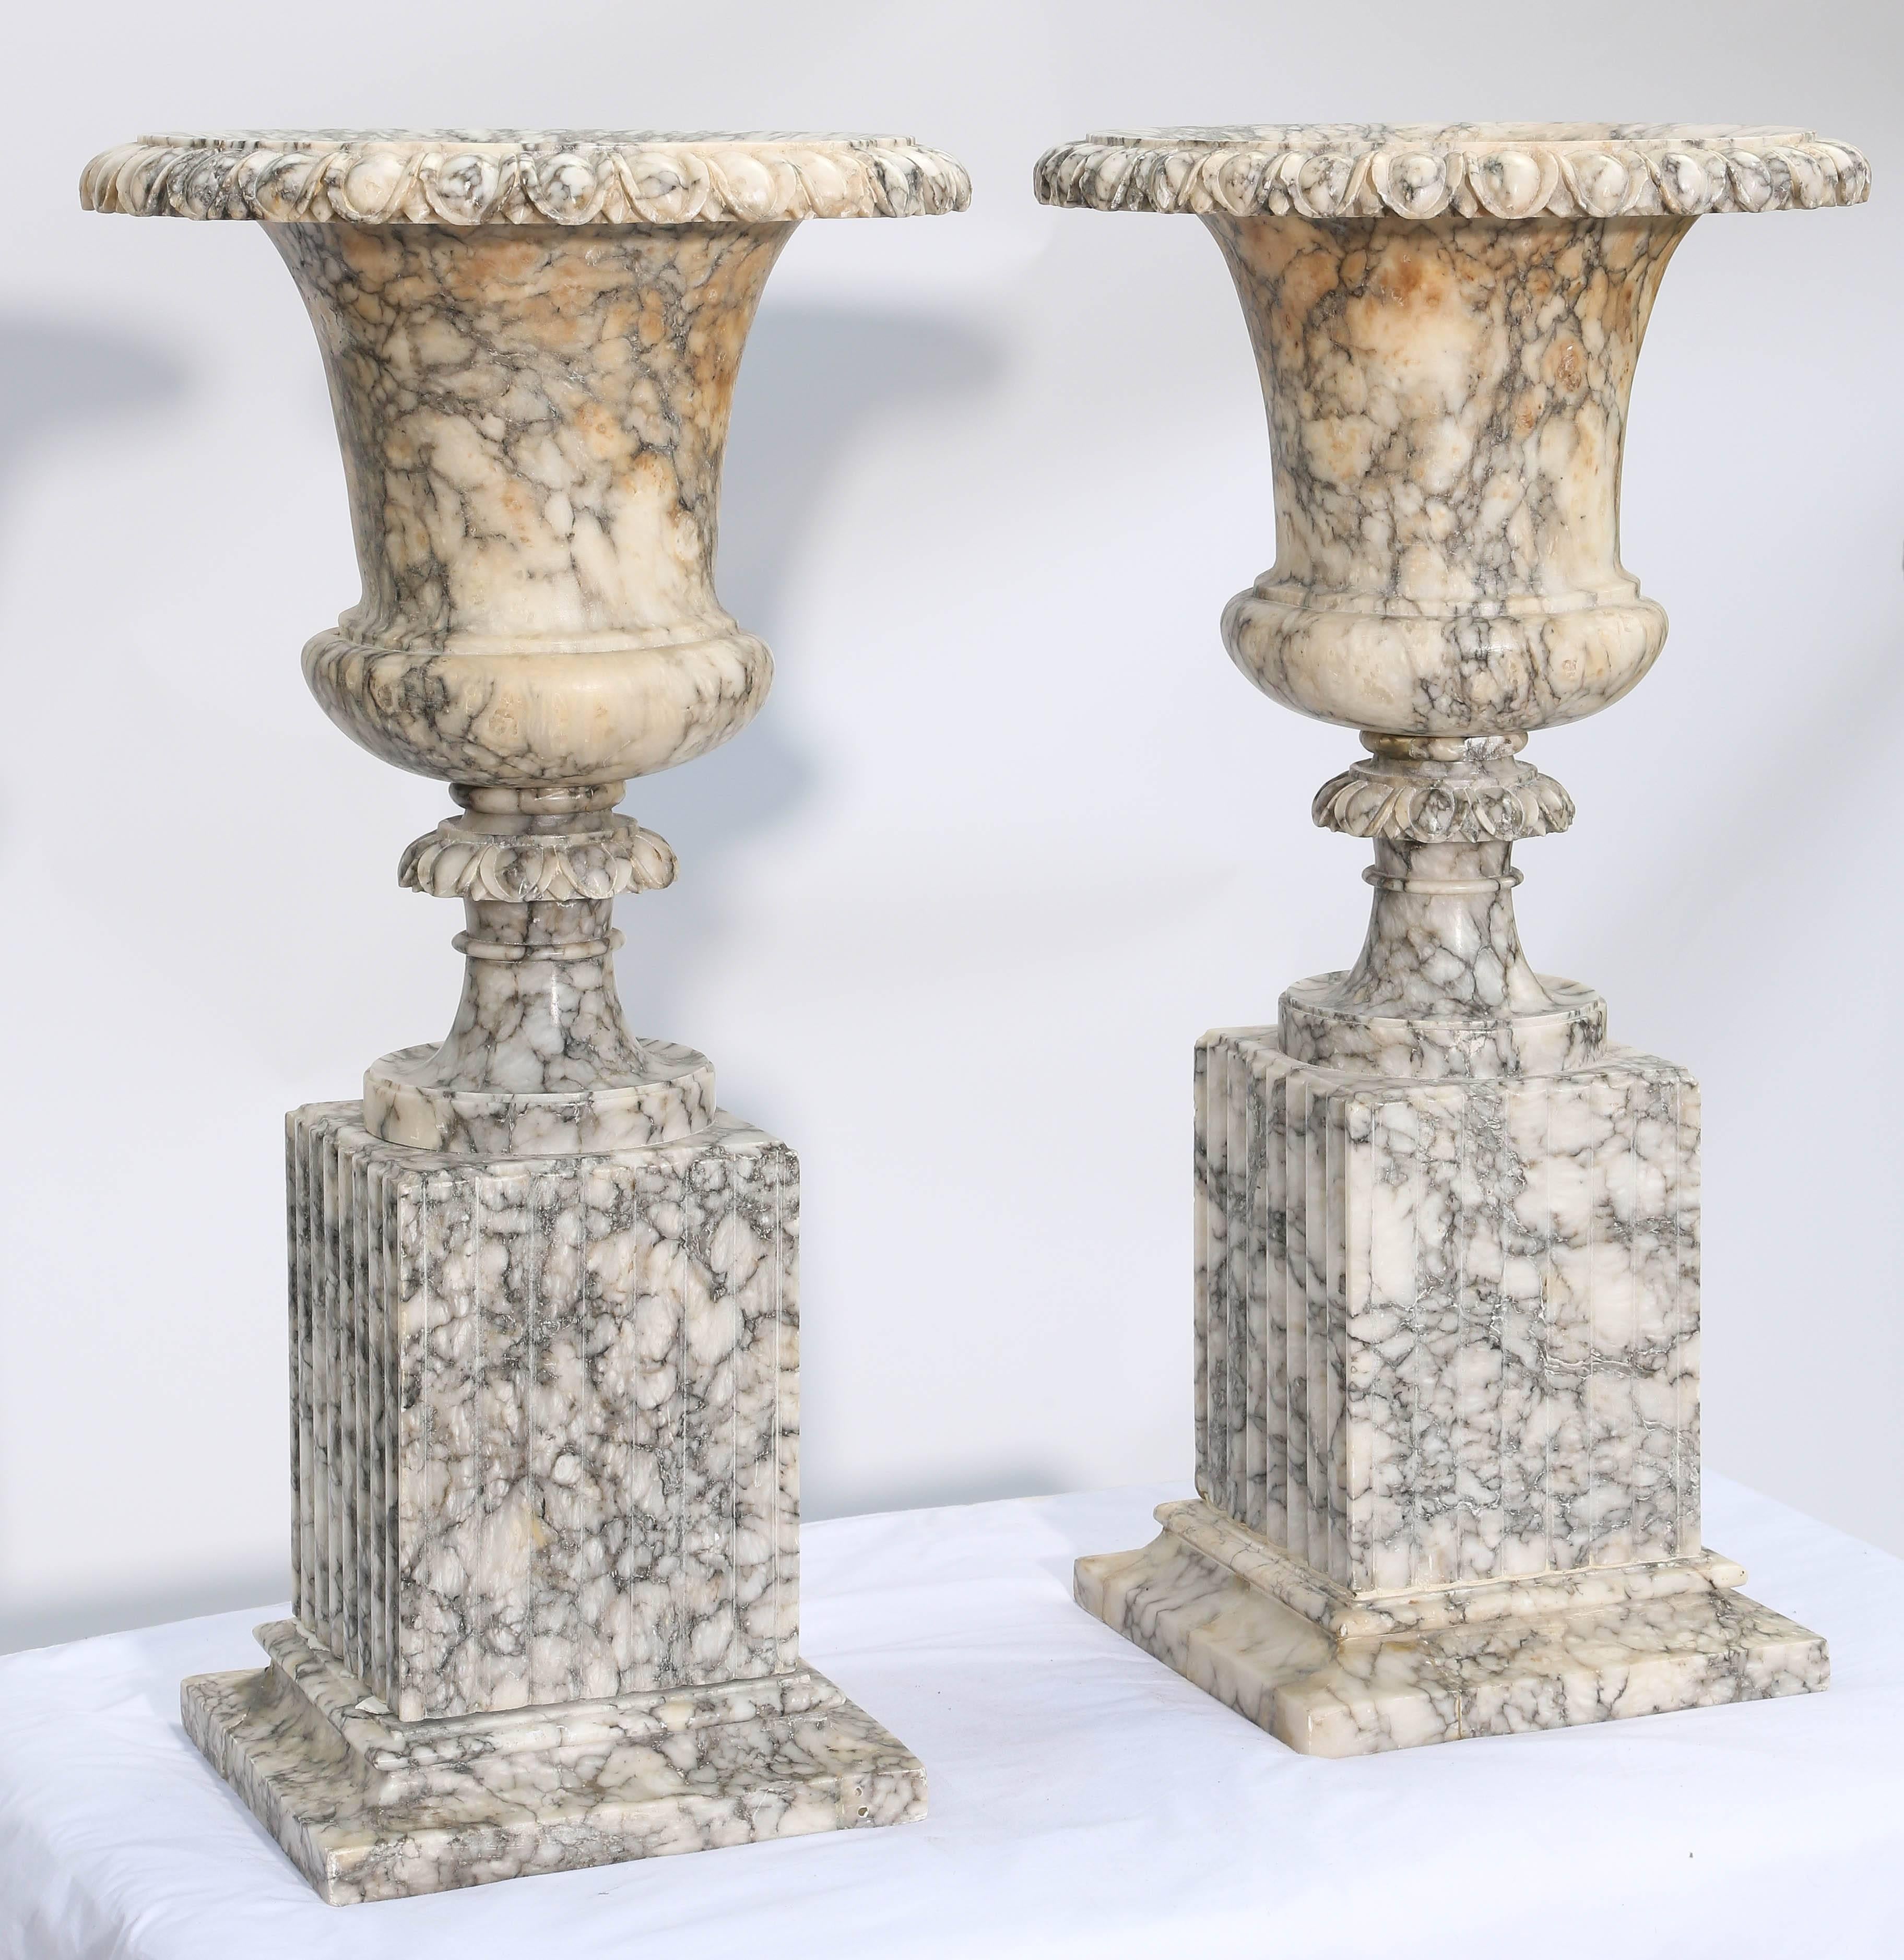 19th Century Pair of Carved Alabaster Urns